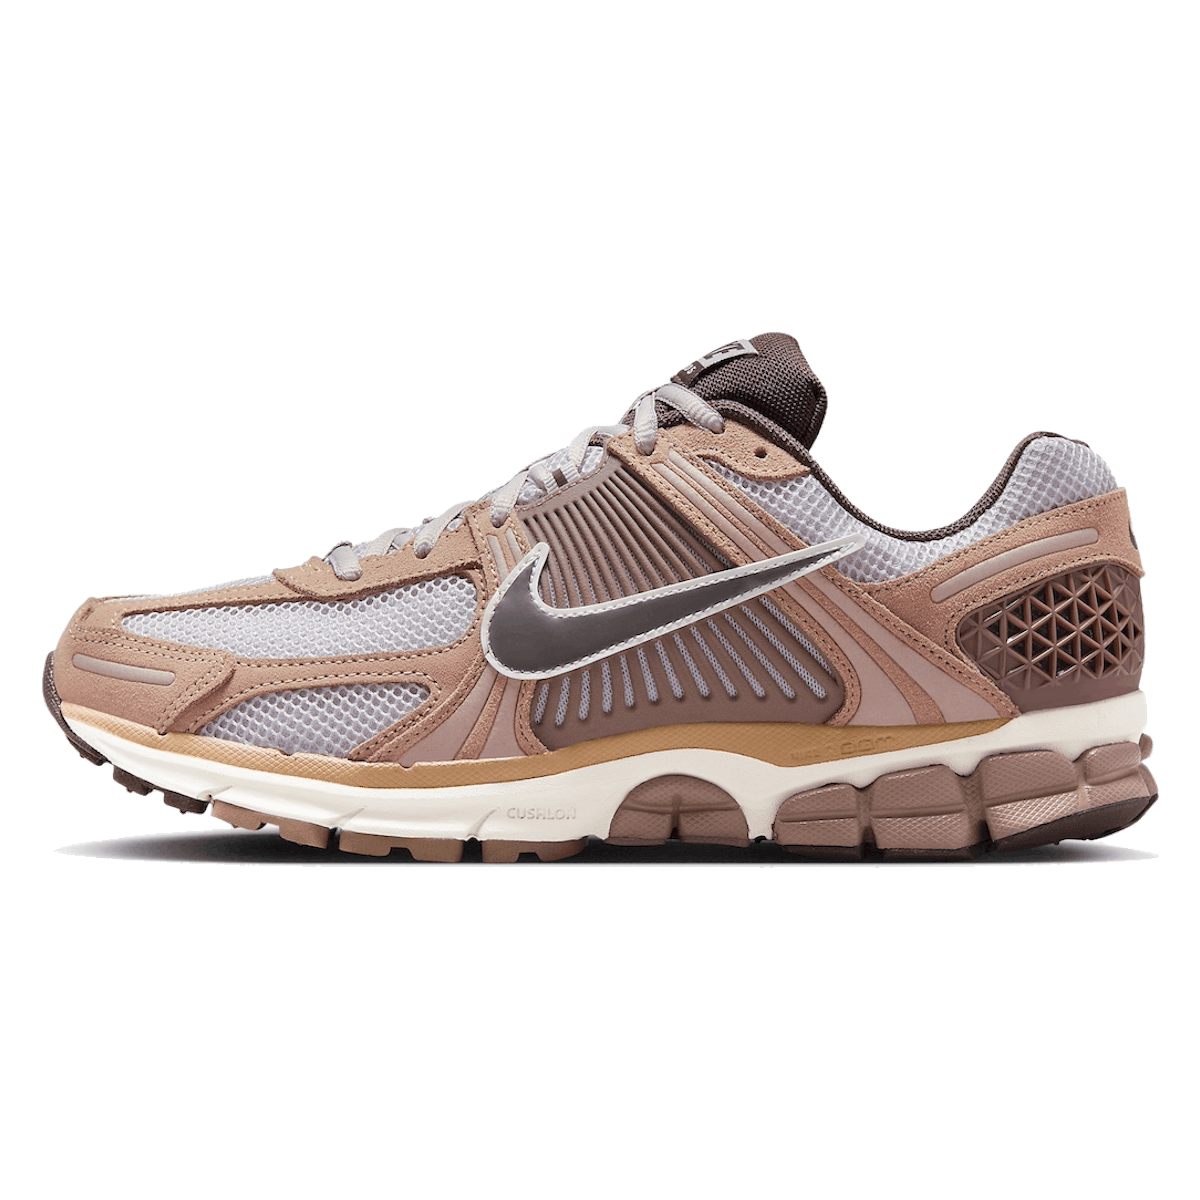 Nike Zoom Vomero 5 "Dusted Clay"